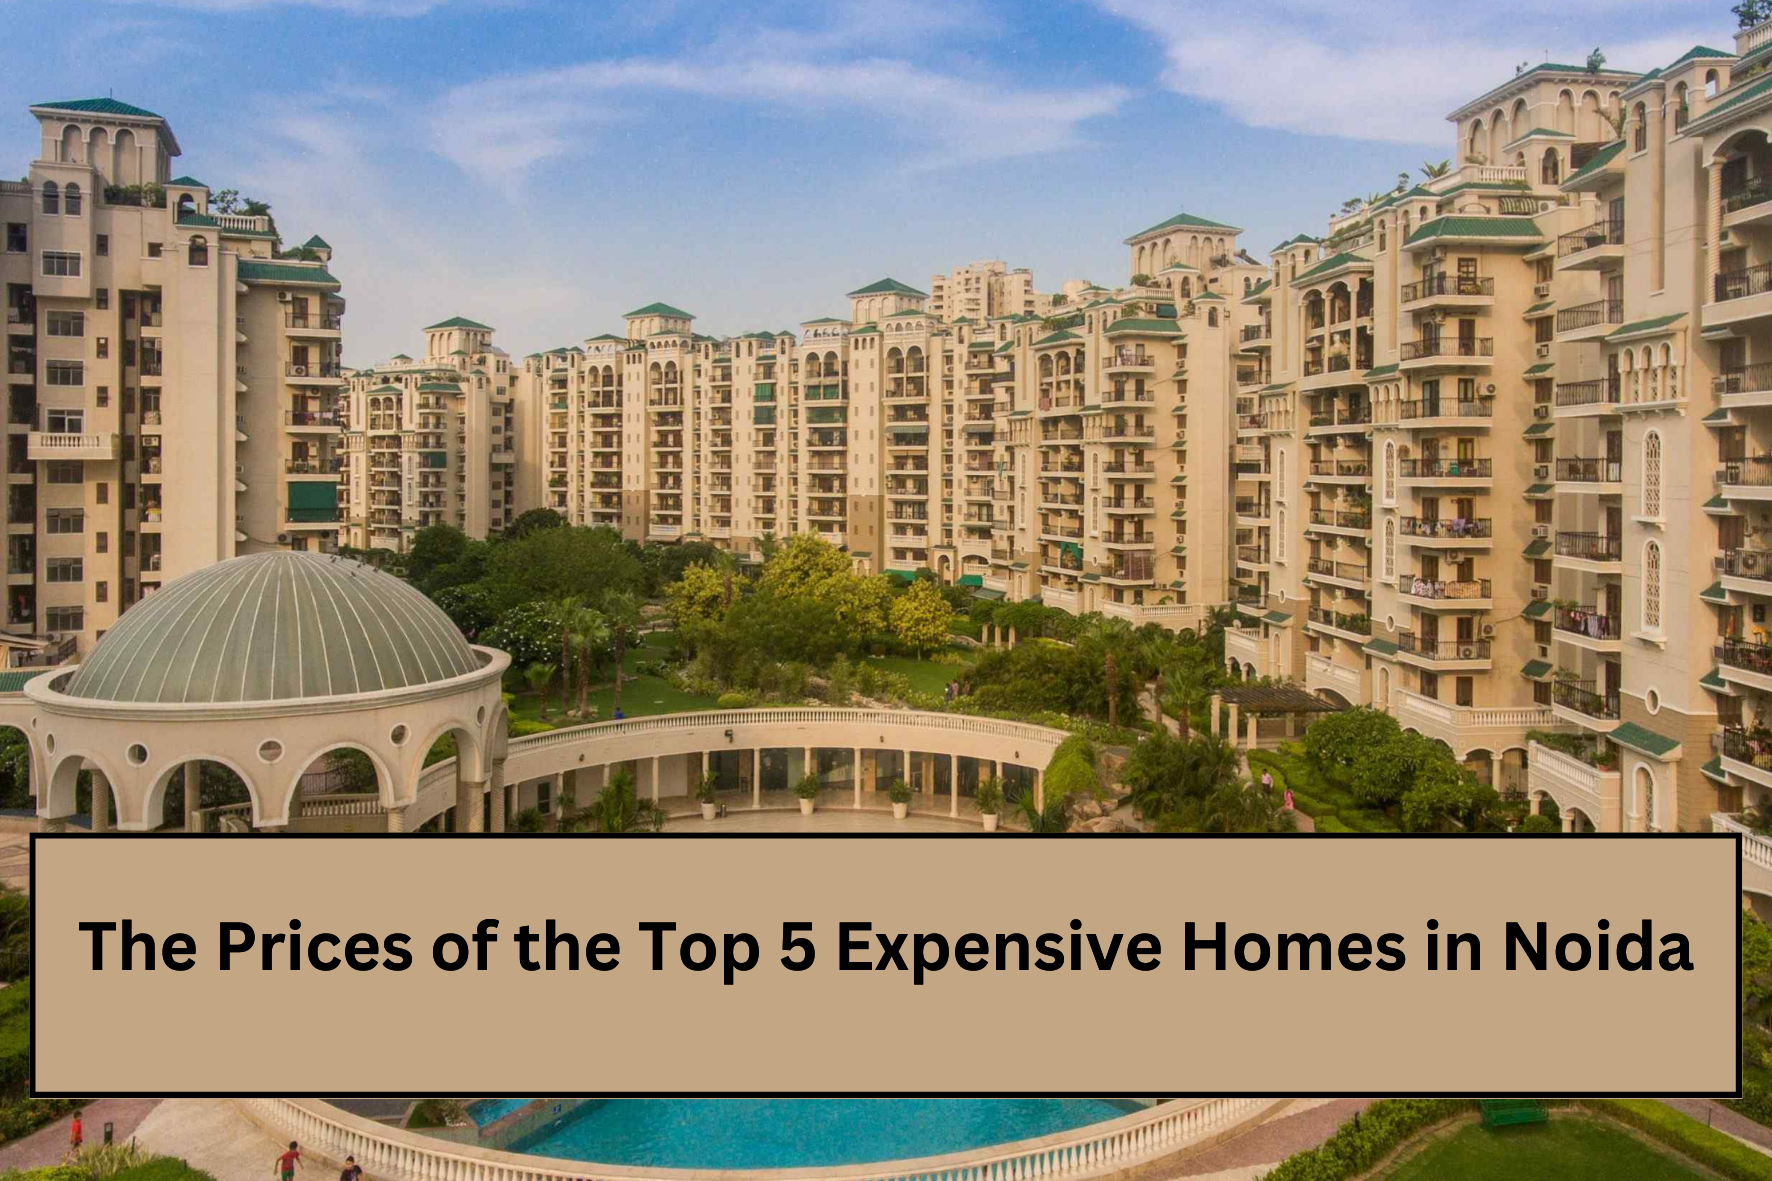 uploads/blog/The_Prices_of_the_Top_5_Expensive_Homes_in_Noida.png